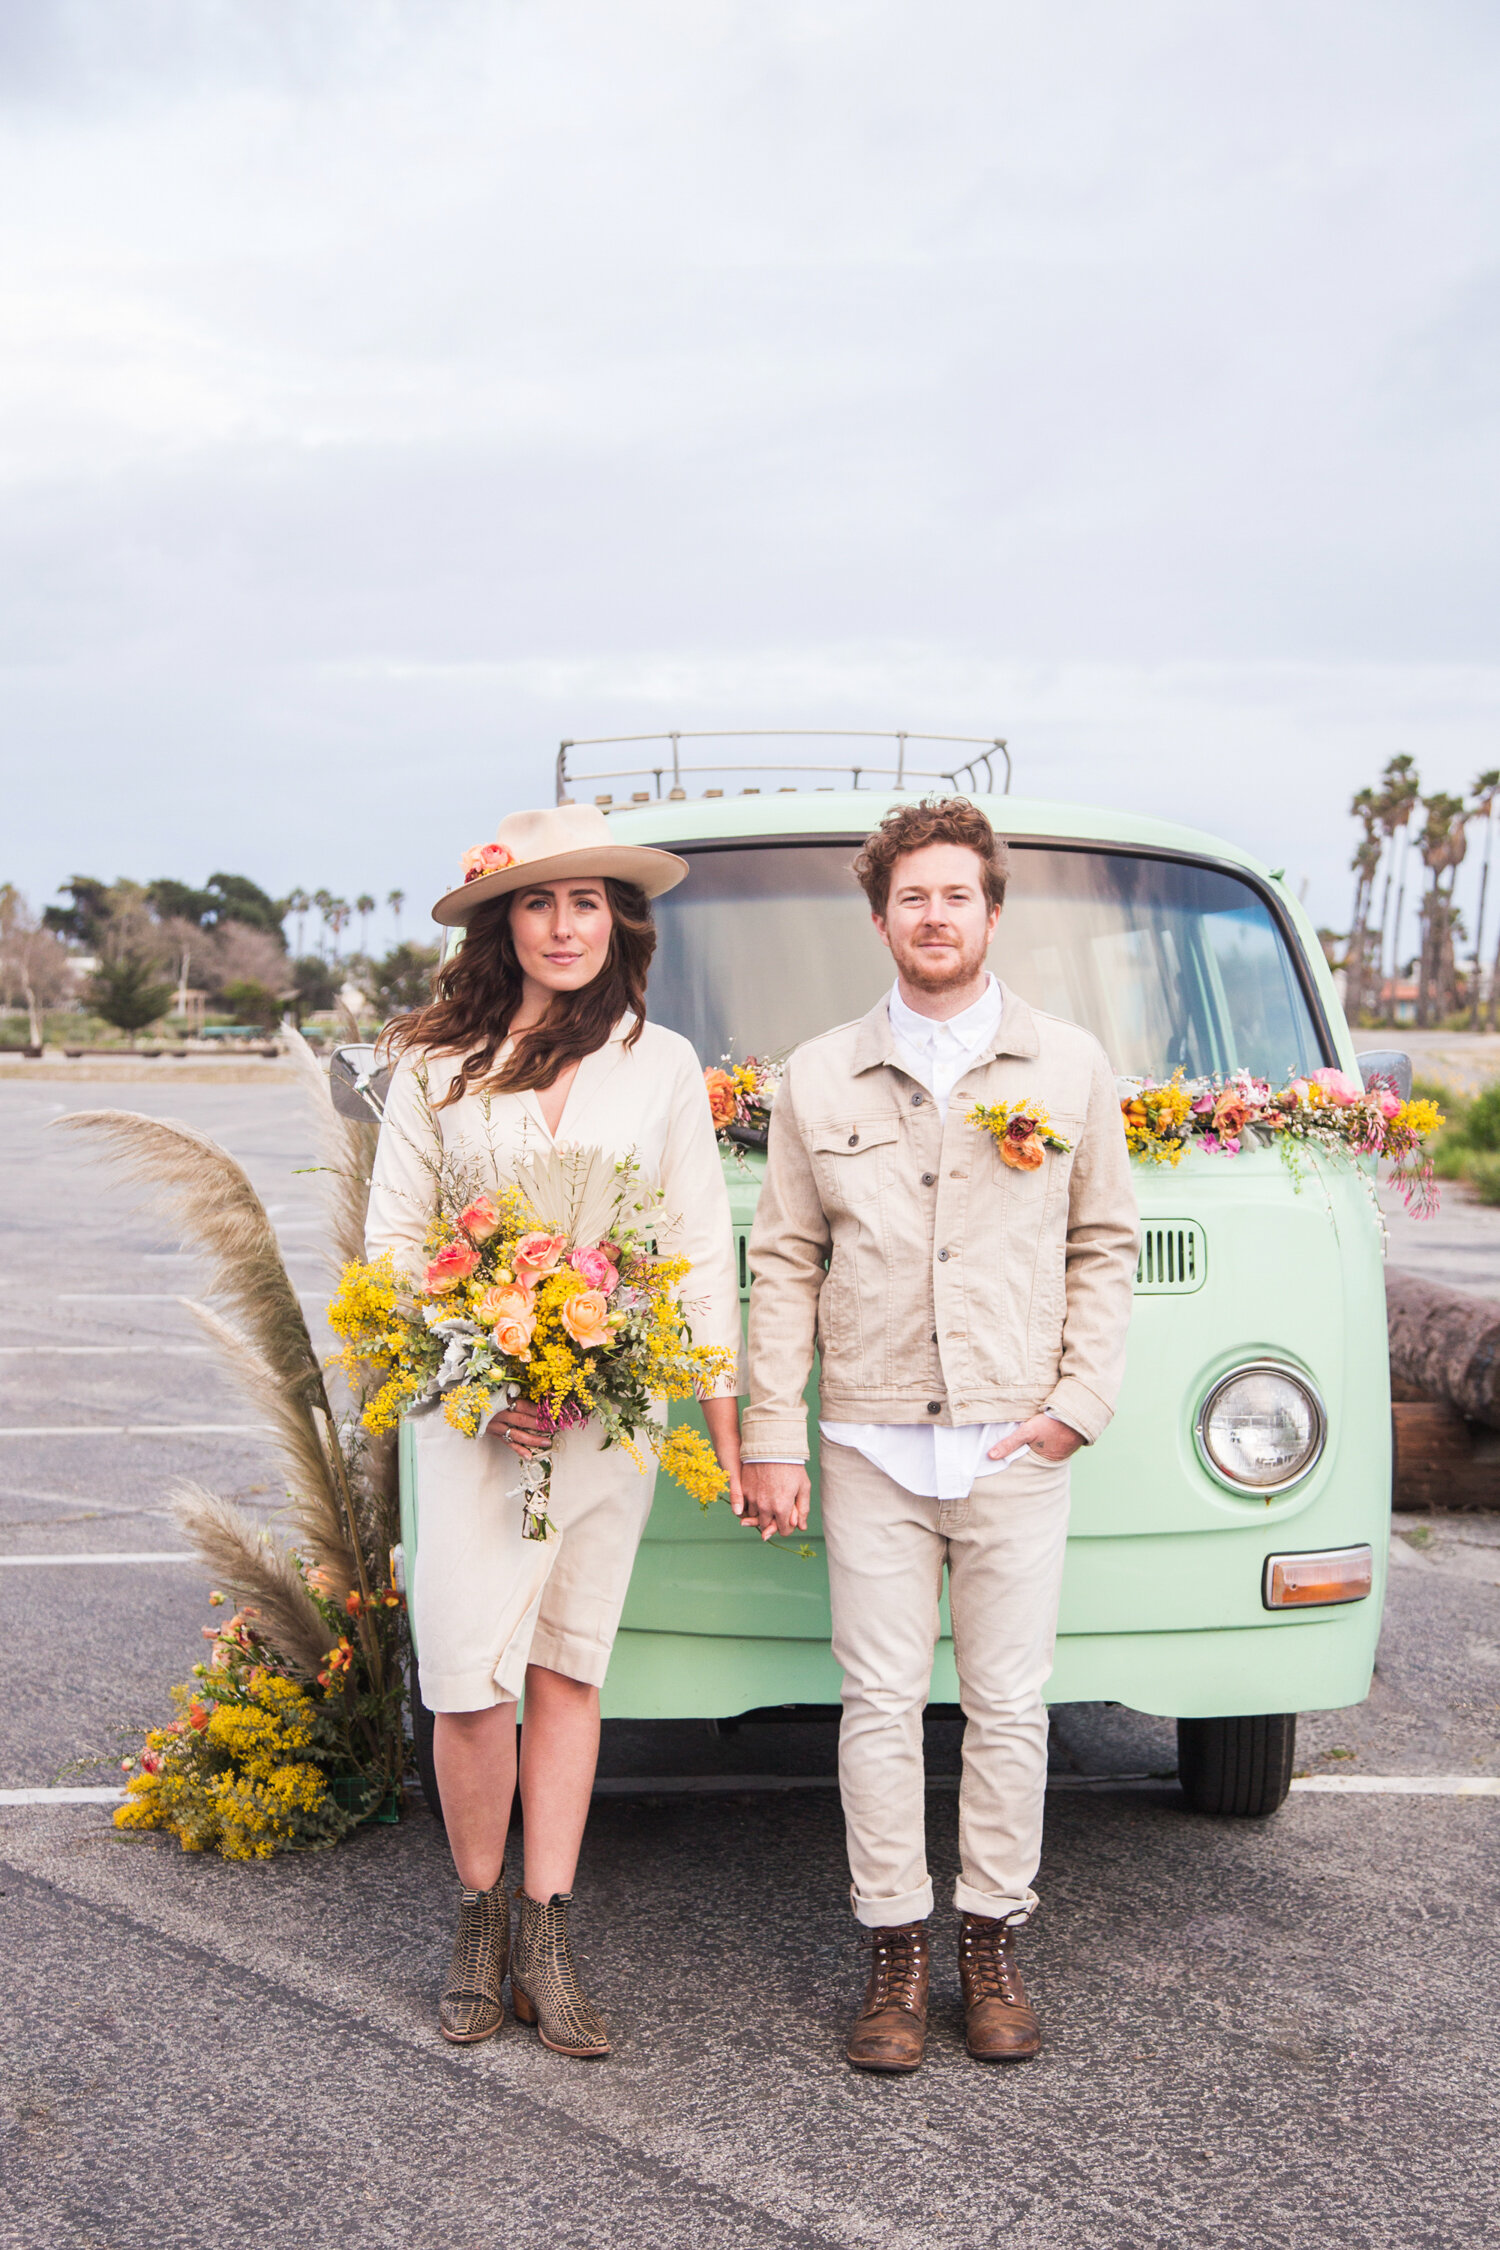 Quirky engagement session ideas